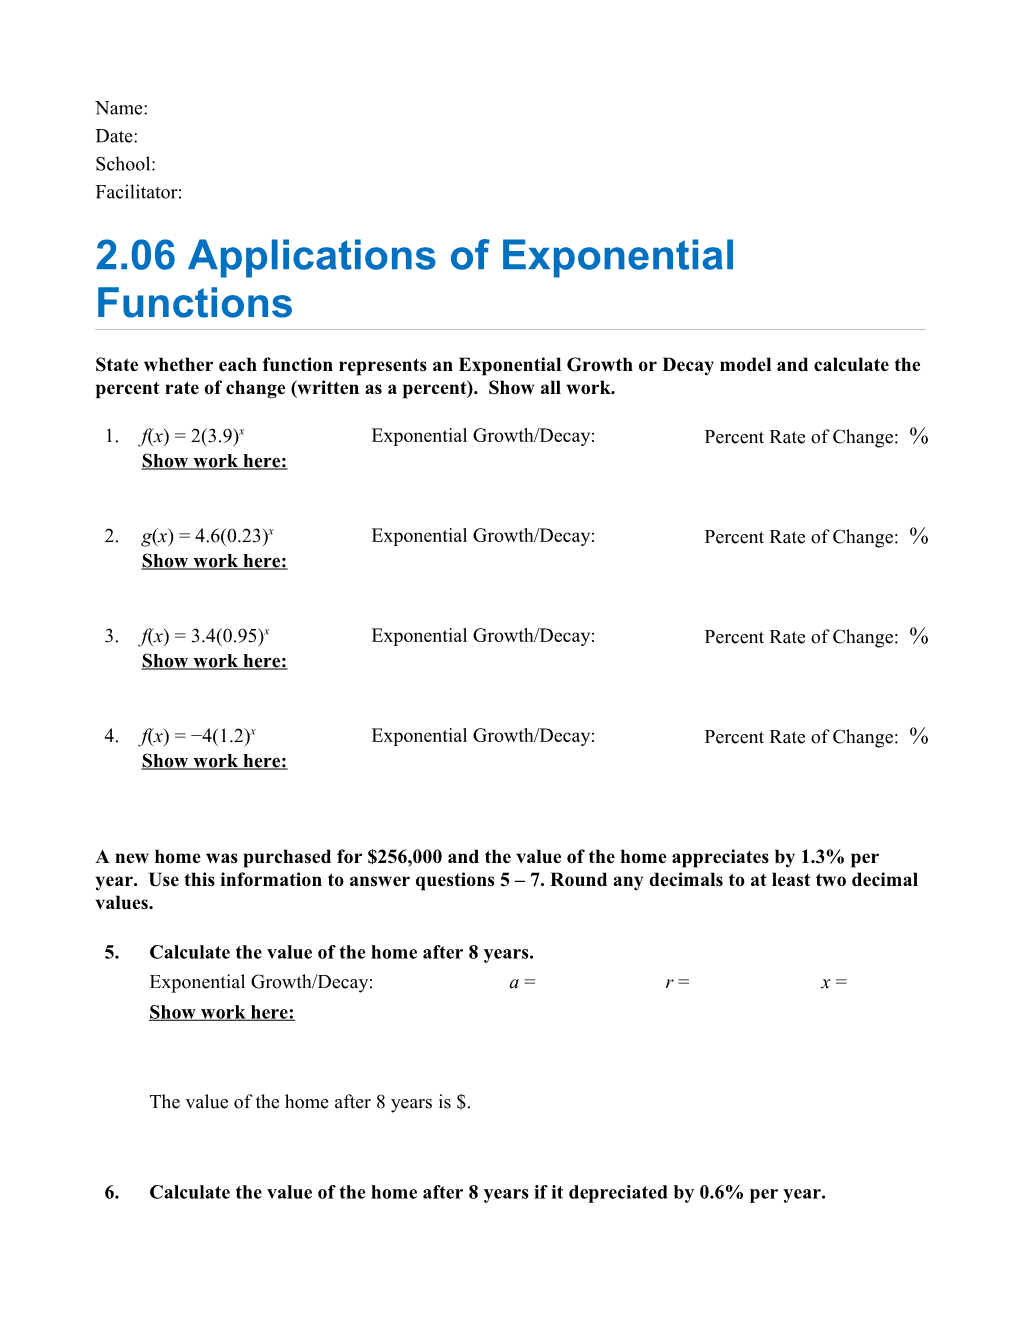 2.06 Applications of Exponential Functions